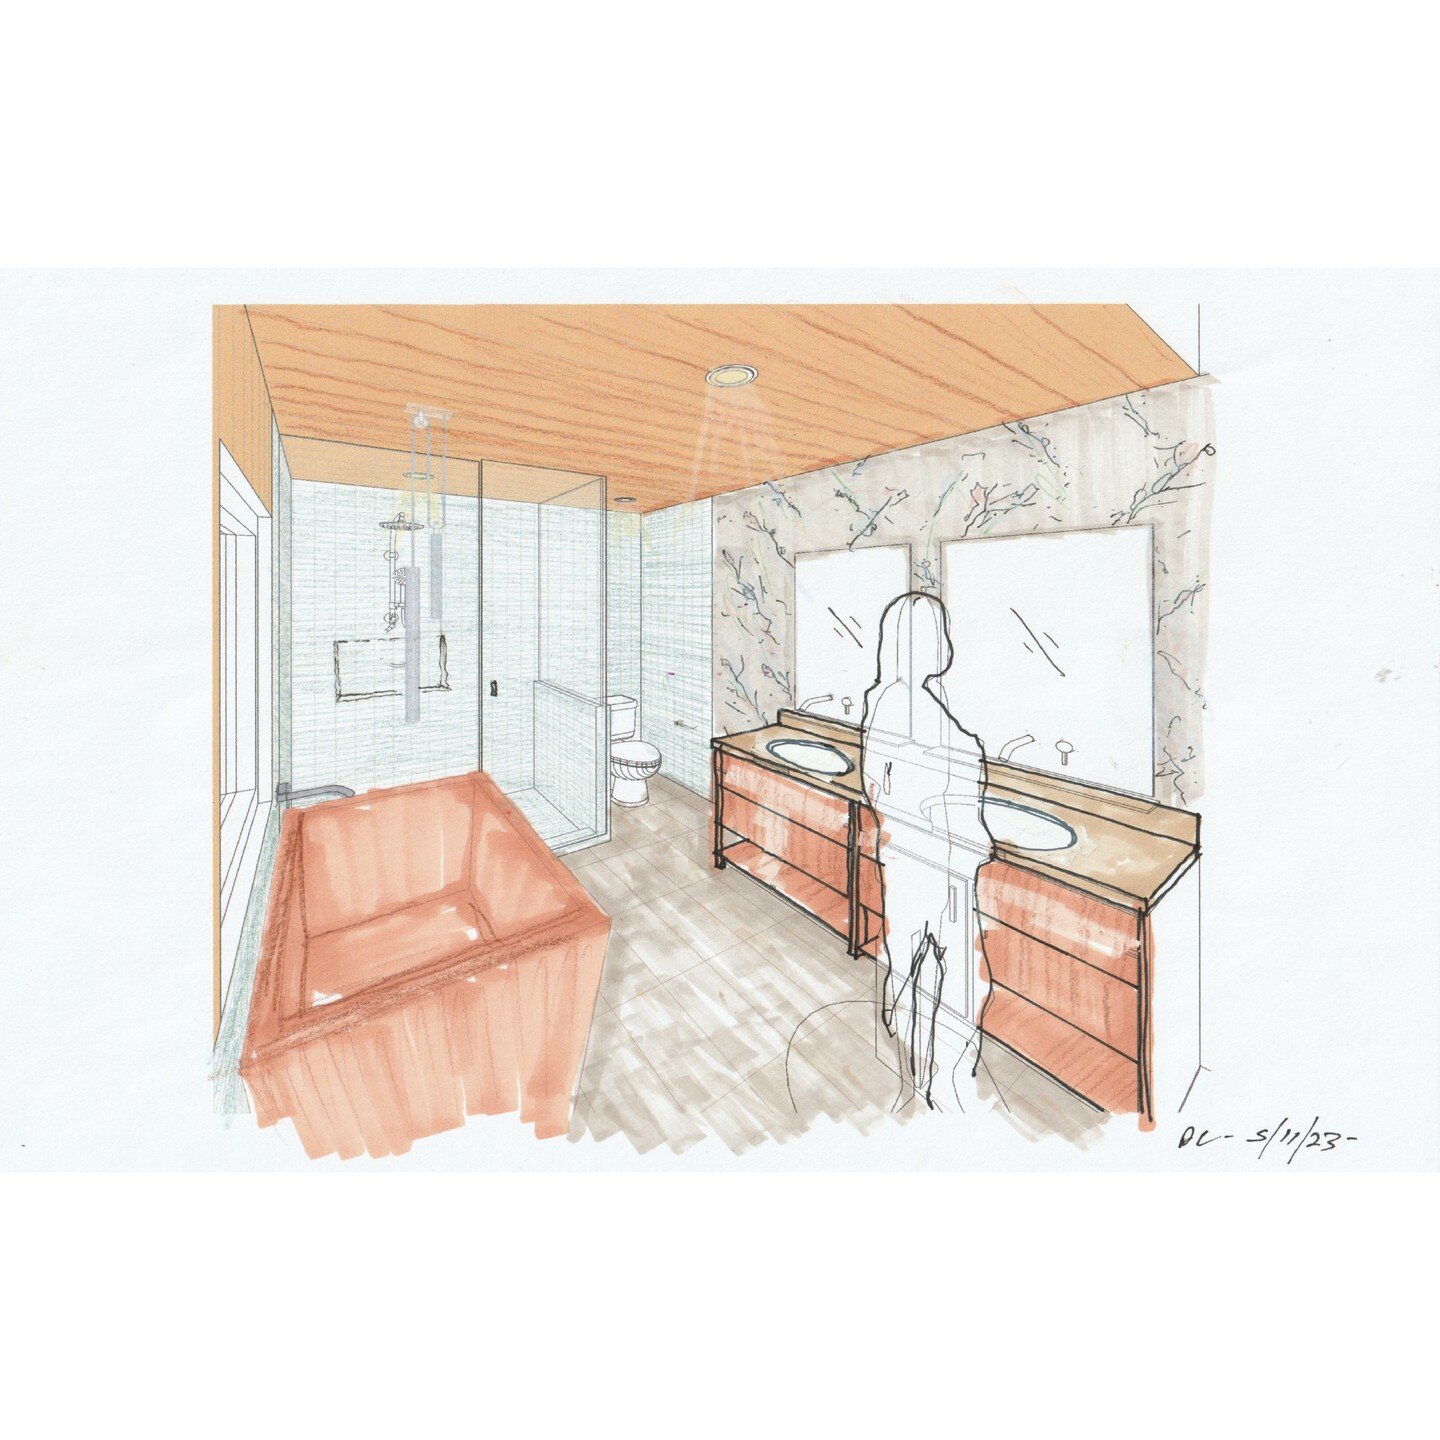 ✨ Alert! 🚀 We recently completed design on a small bathroom remodel that celebrates our client's Japanese heritage. 🇯🇵✨
At DRS and Tsuga, we specialize in the design and development of multi-family projects, but we also take on projects of all sca